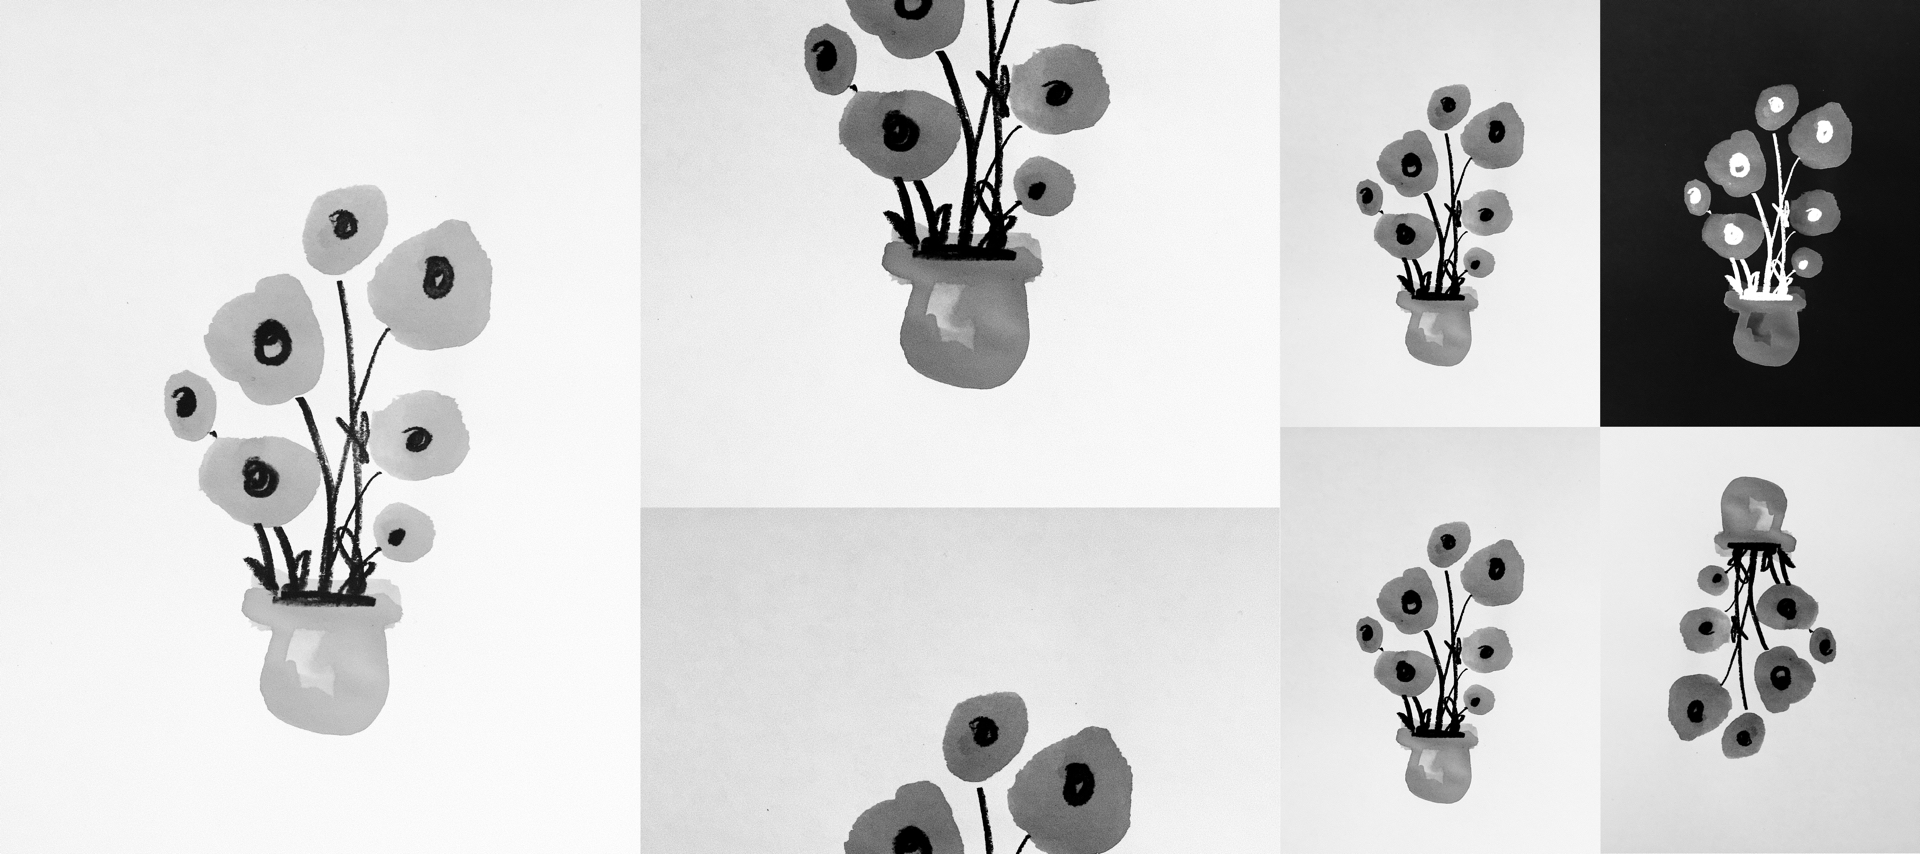 An illustration of a vase full of flowers is shown in different ways to signify cognitive differences causing users to see things differently